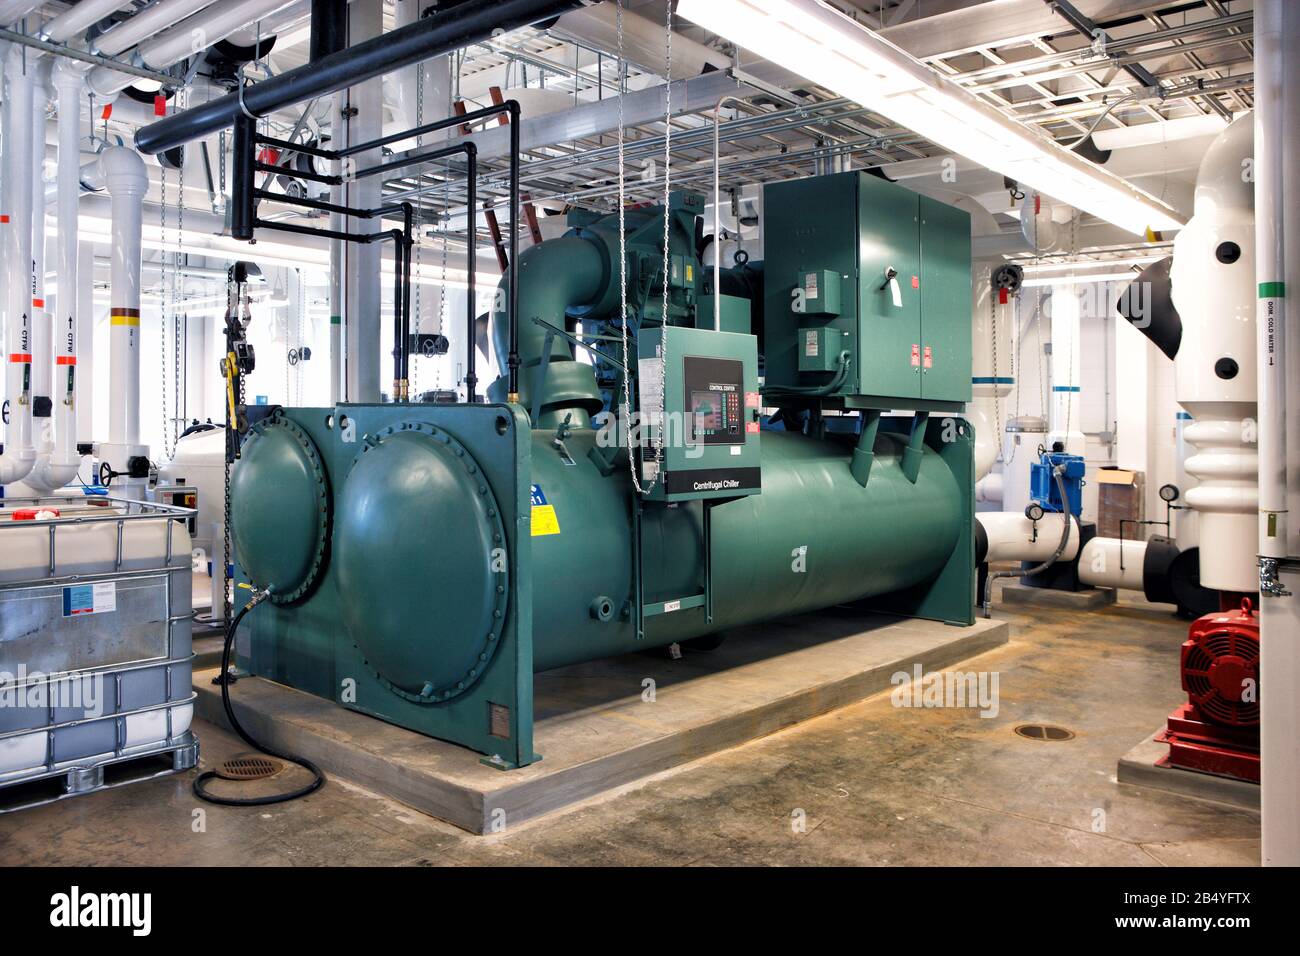 A large industrial condenser unit for a chiller in an HVAC system. Stock Photo